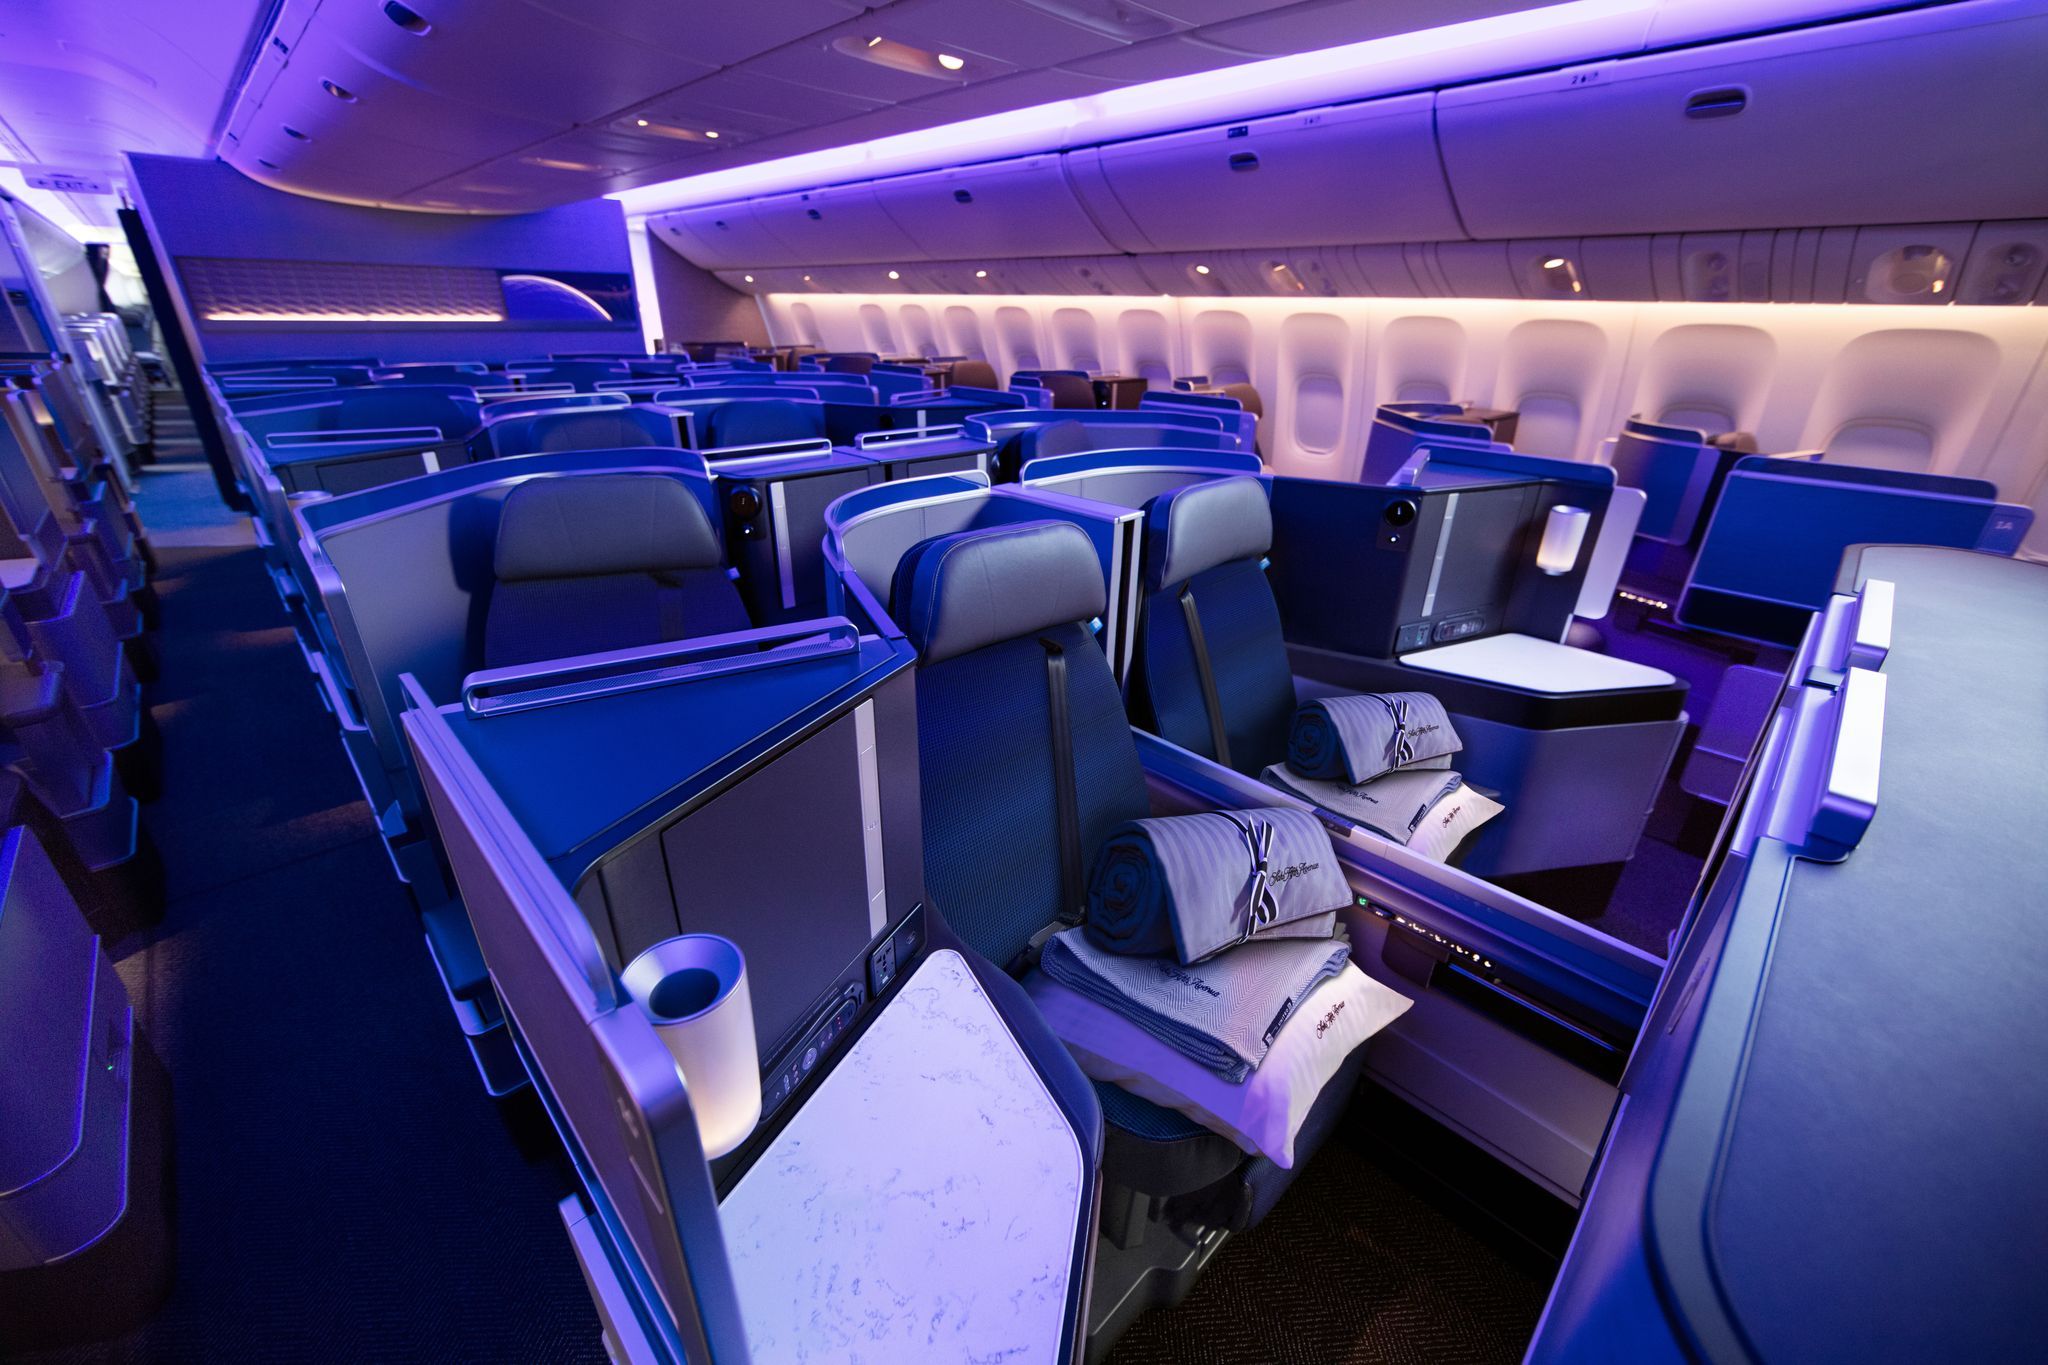 United Airlines Polaris Business class cabin.